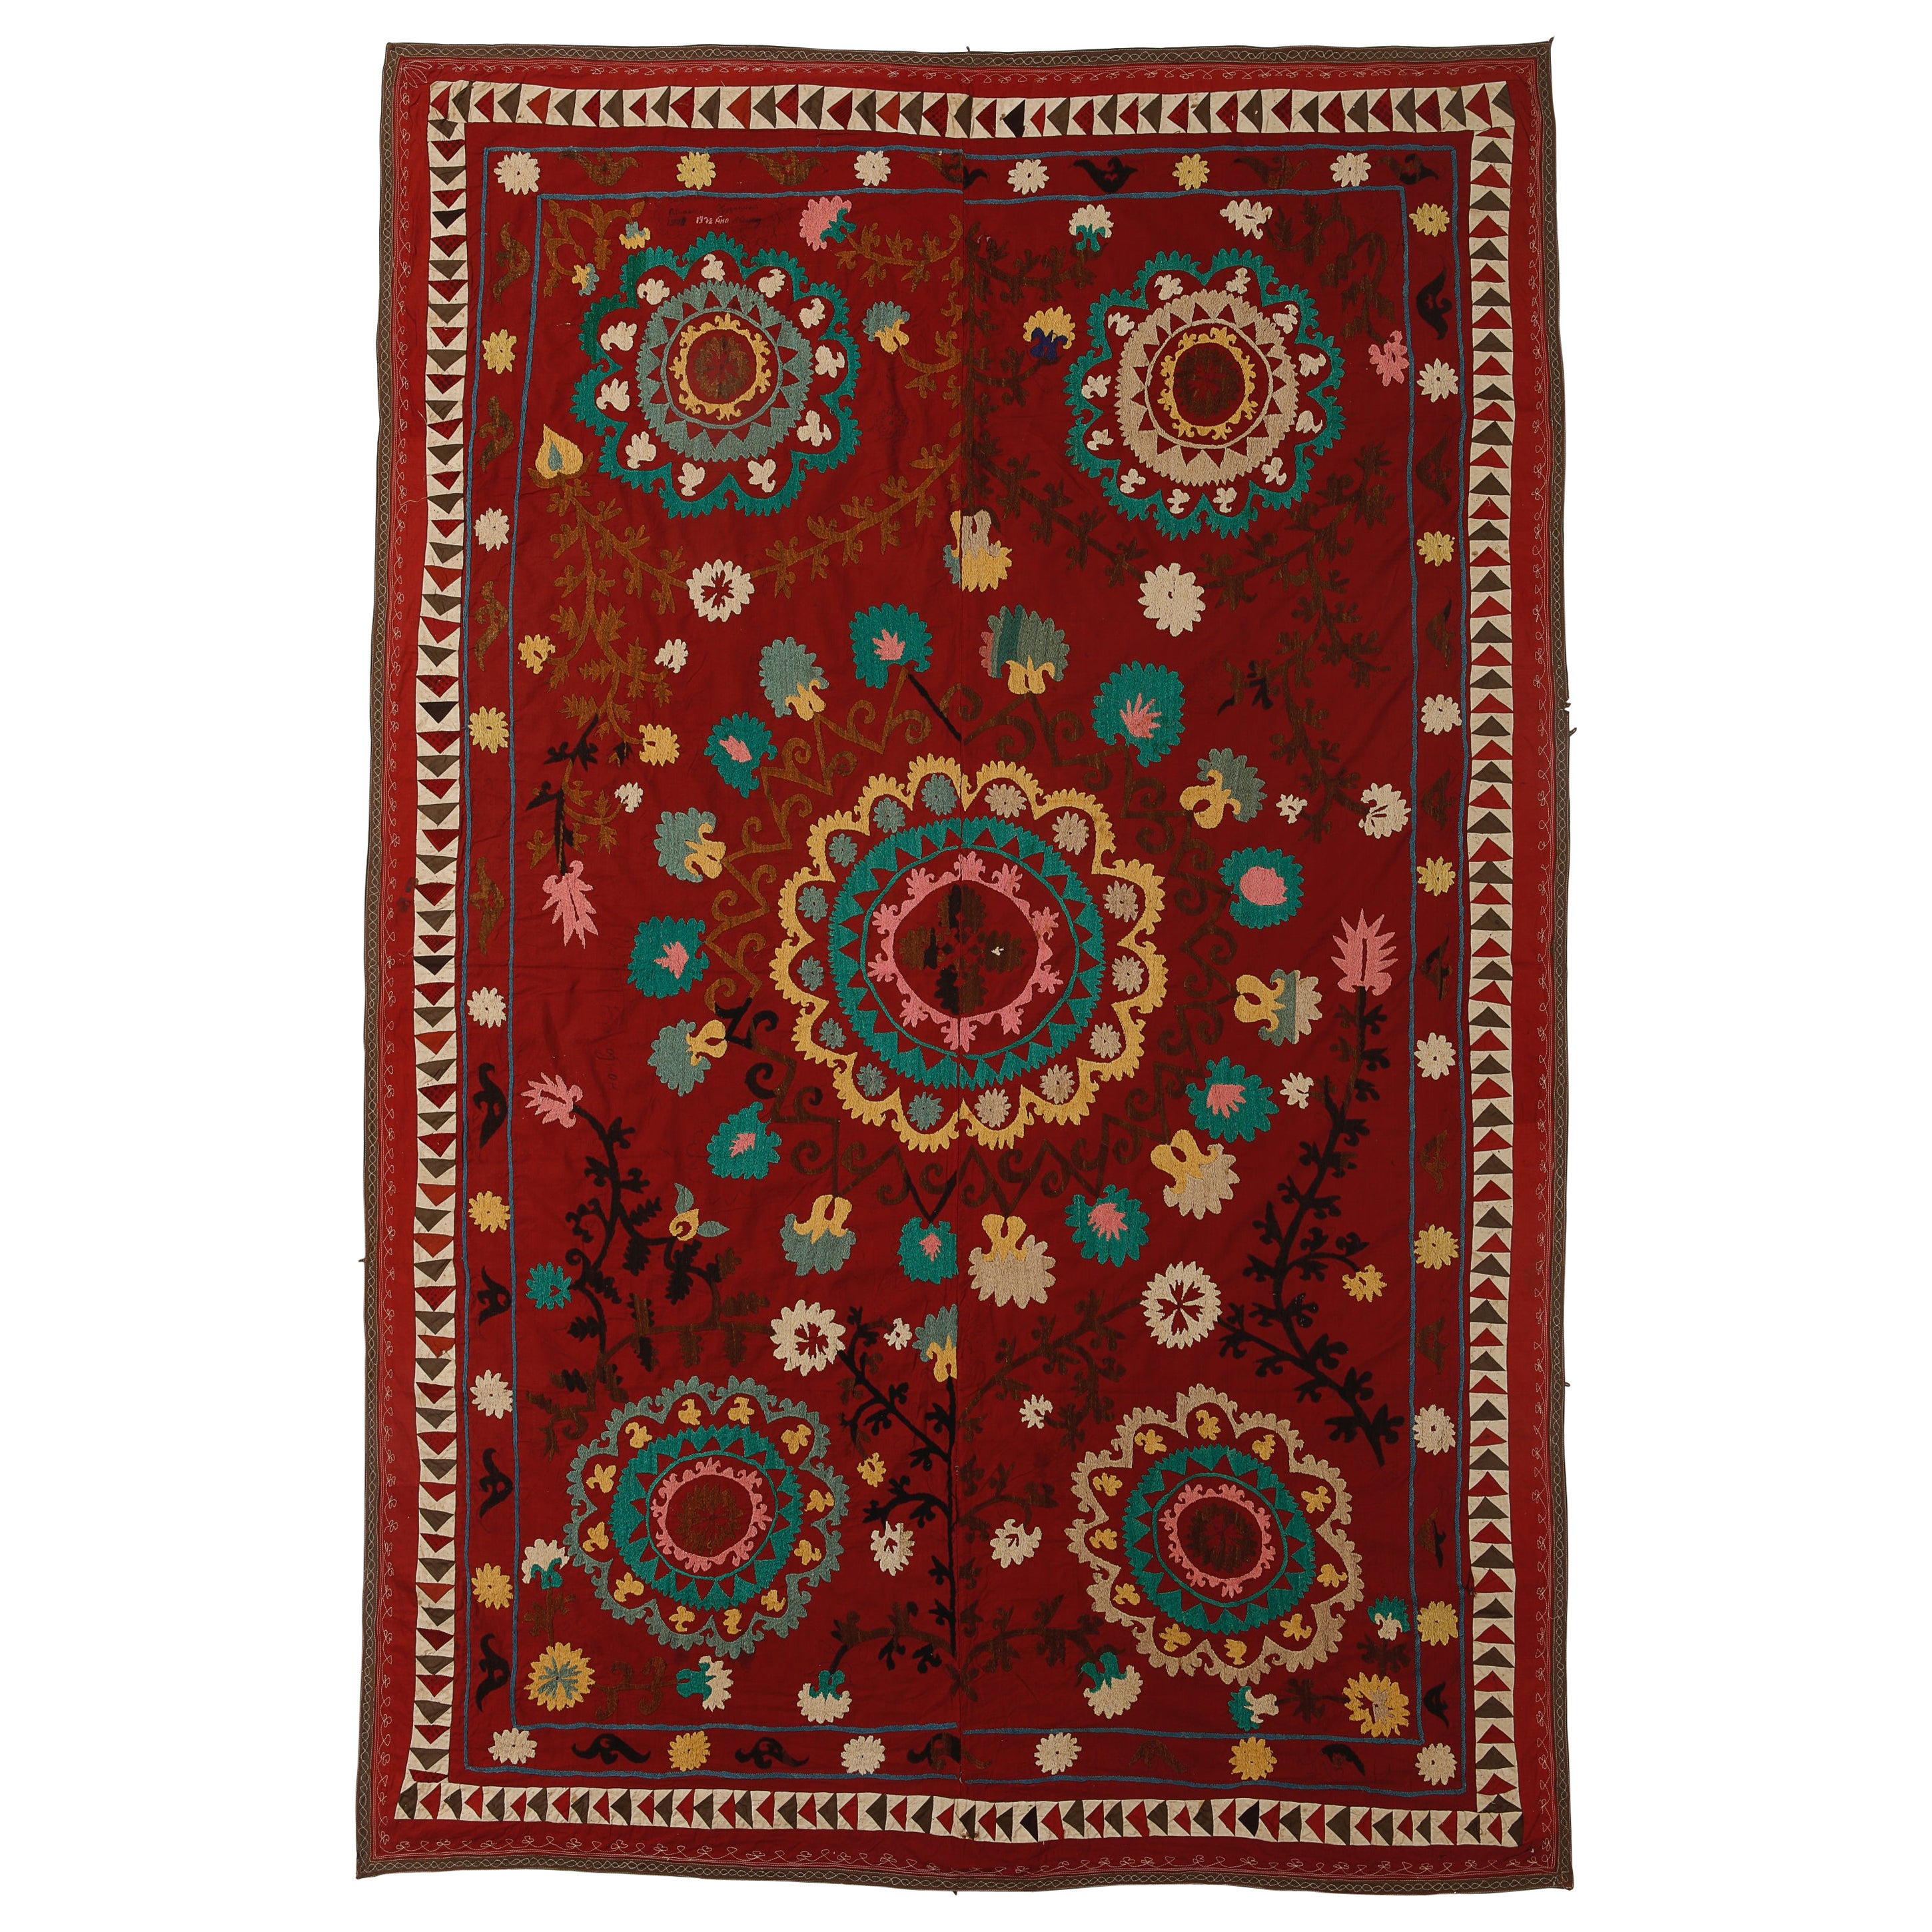 5.5x8.3 ft Uzbek Silk Hand Embroidered Bed Cover, Decorative Suzani Wall Hanging For Sale